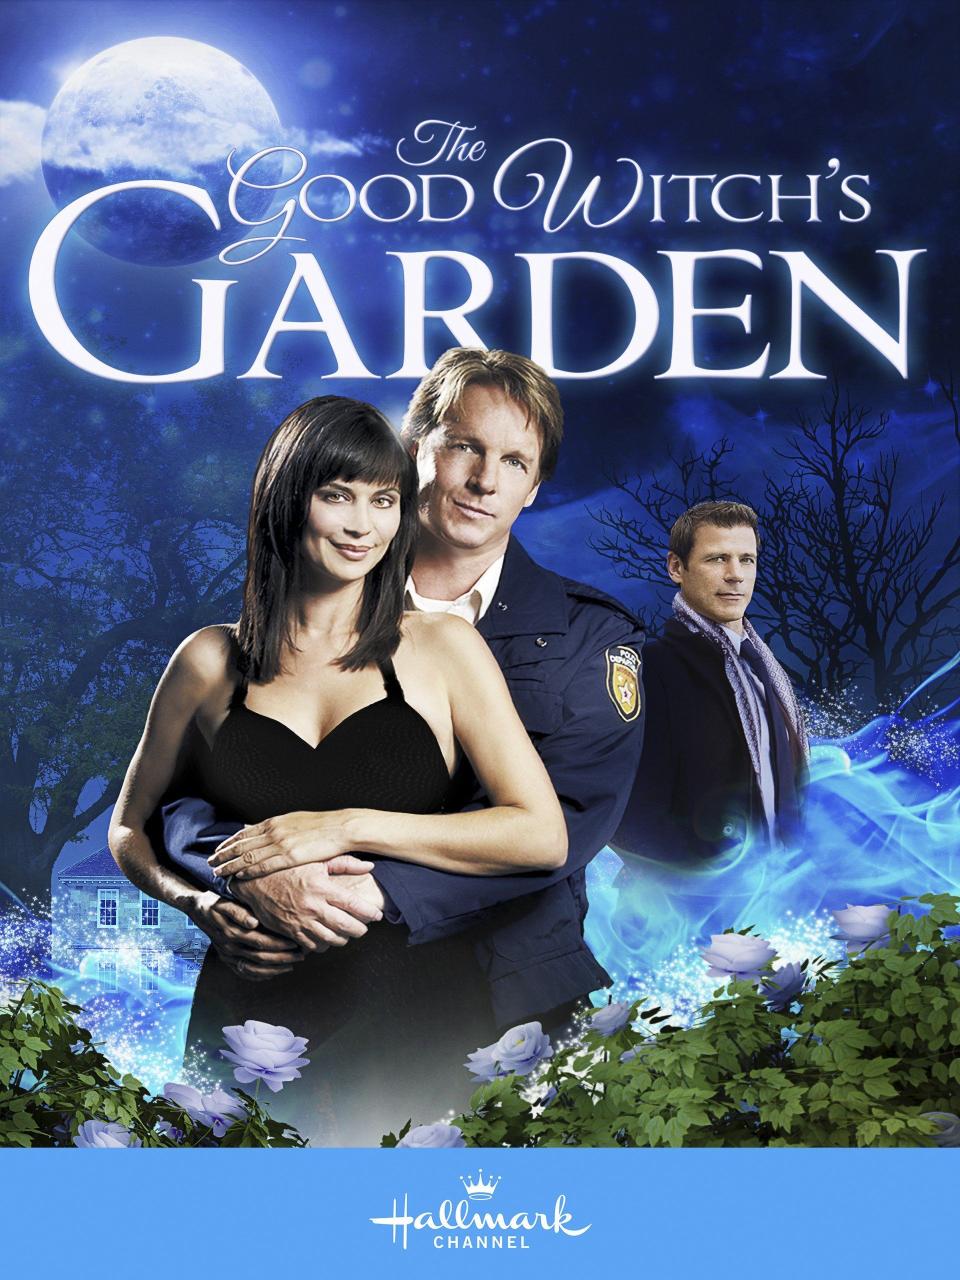 2) The Good Witch's Garden (2009)